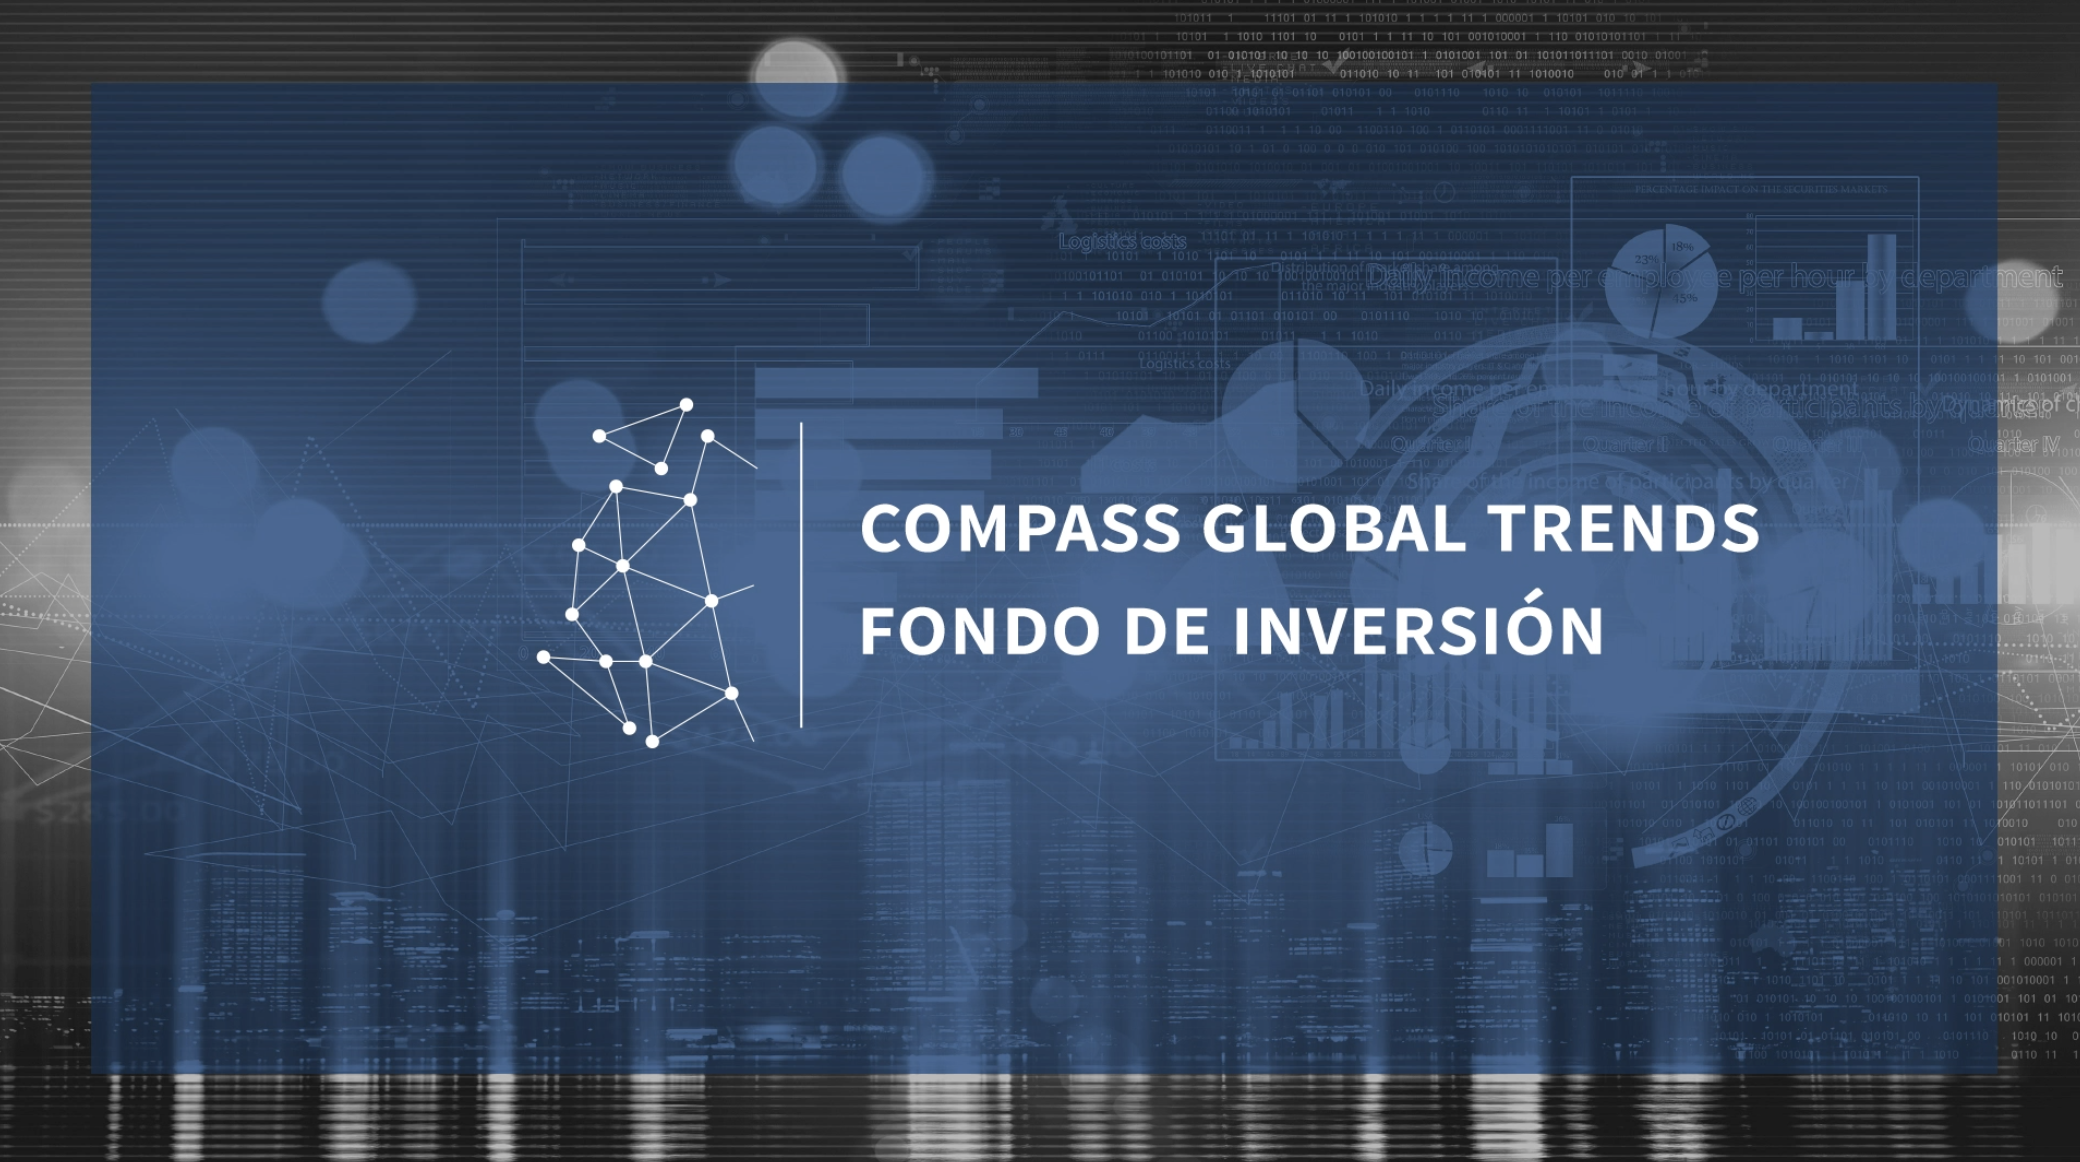 Compass Global Trends